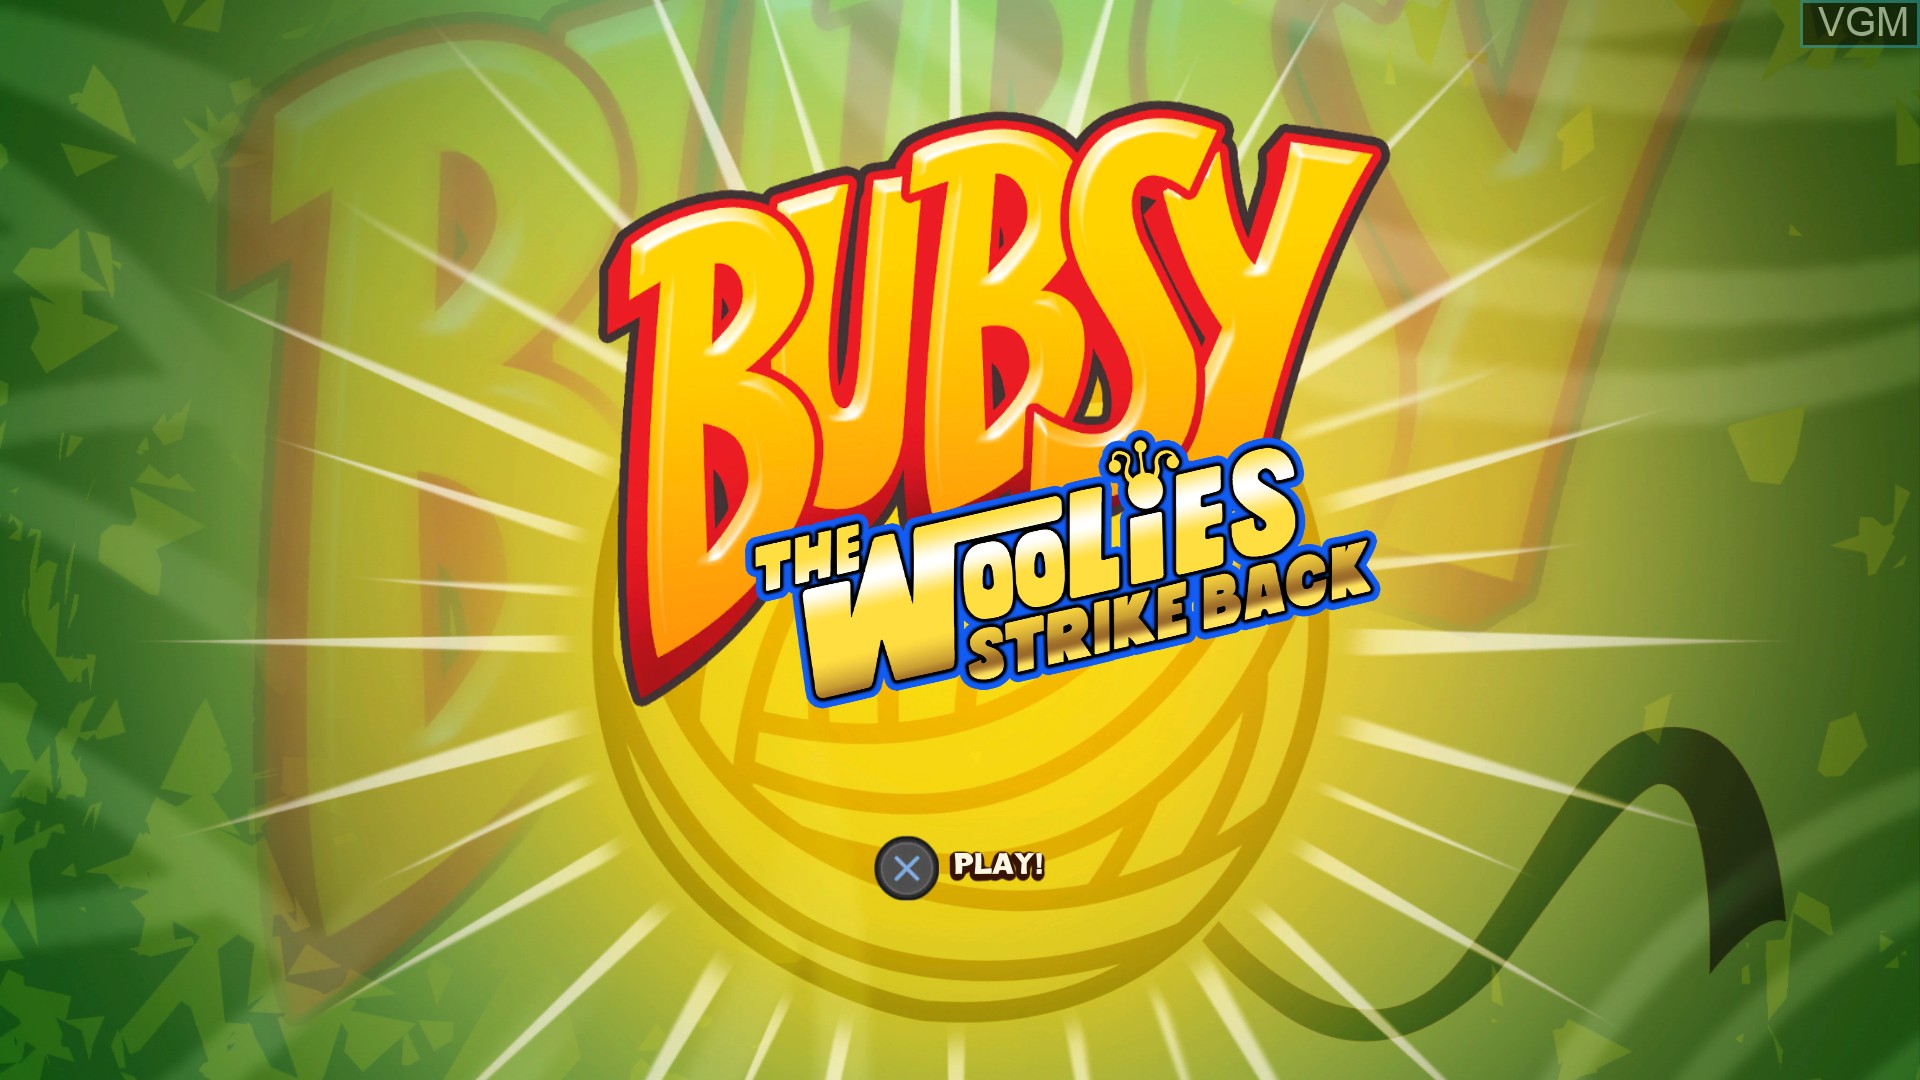 Title screen of the game Bubsy - The Woolies Strike Back on Sony Playstation 4